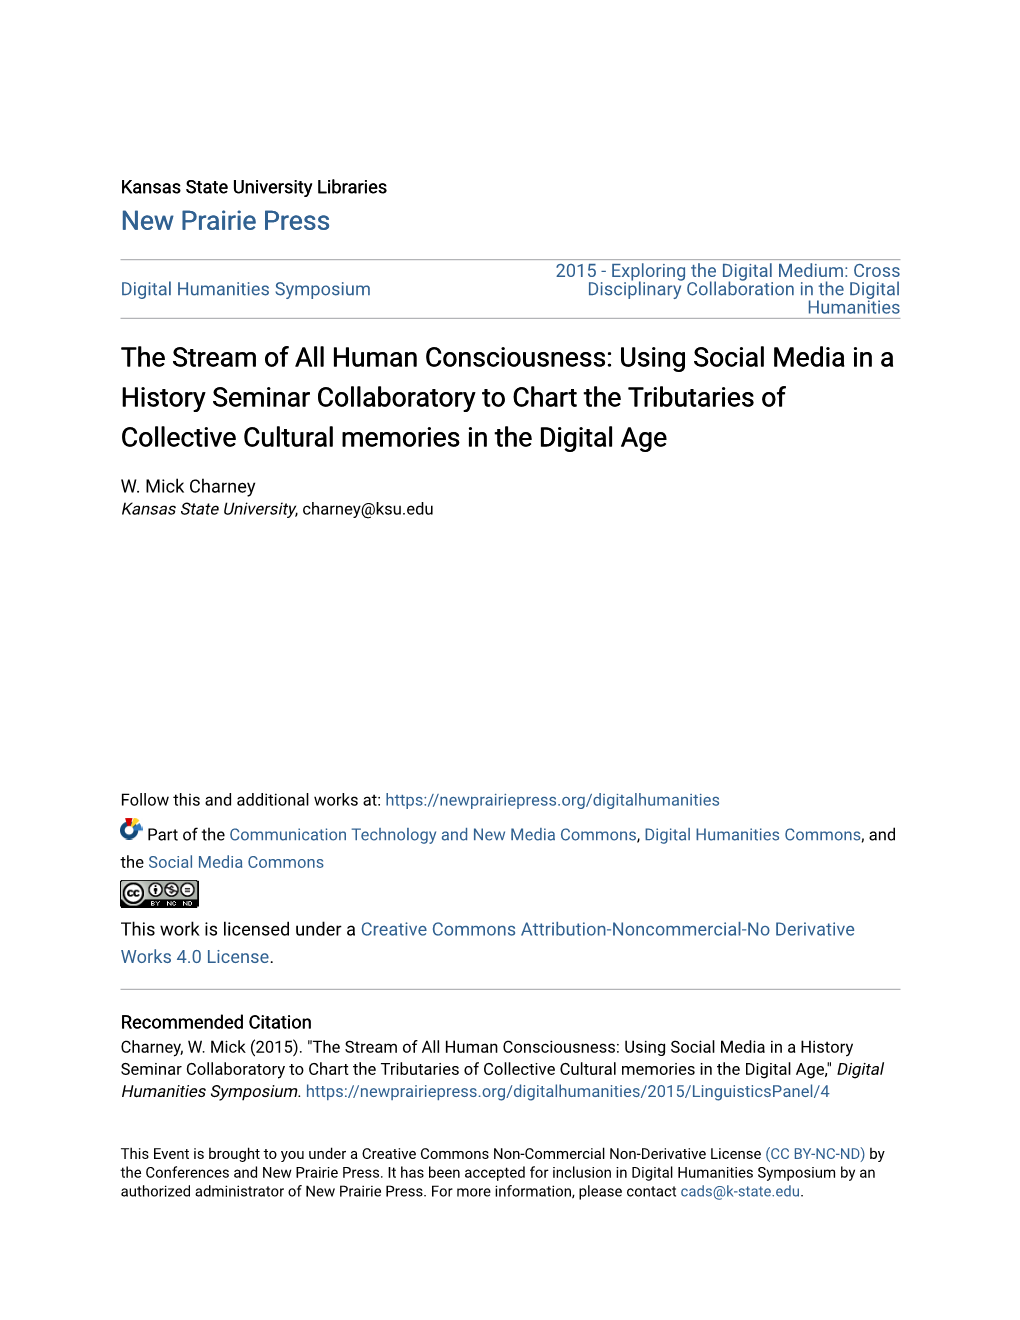 The Stream of All Human Consciousness: Using Social Media in a History Seminar Collaboratory to Chart the Tributaries of Collec